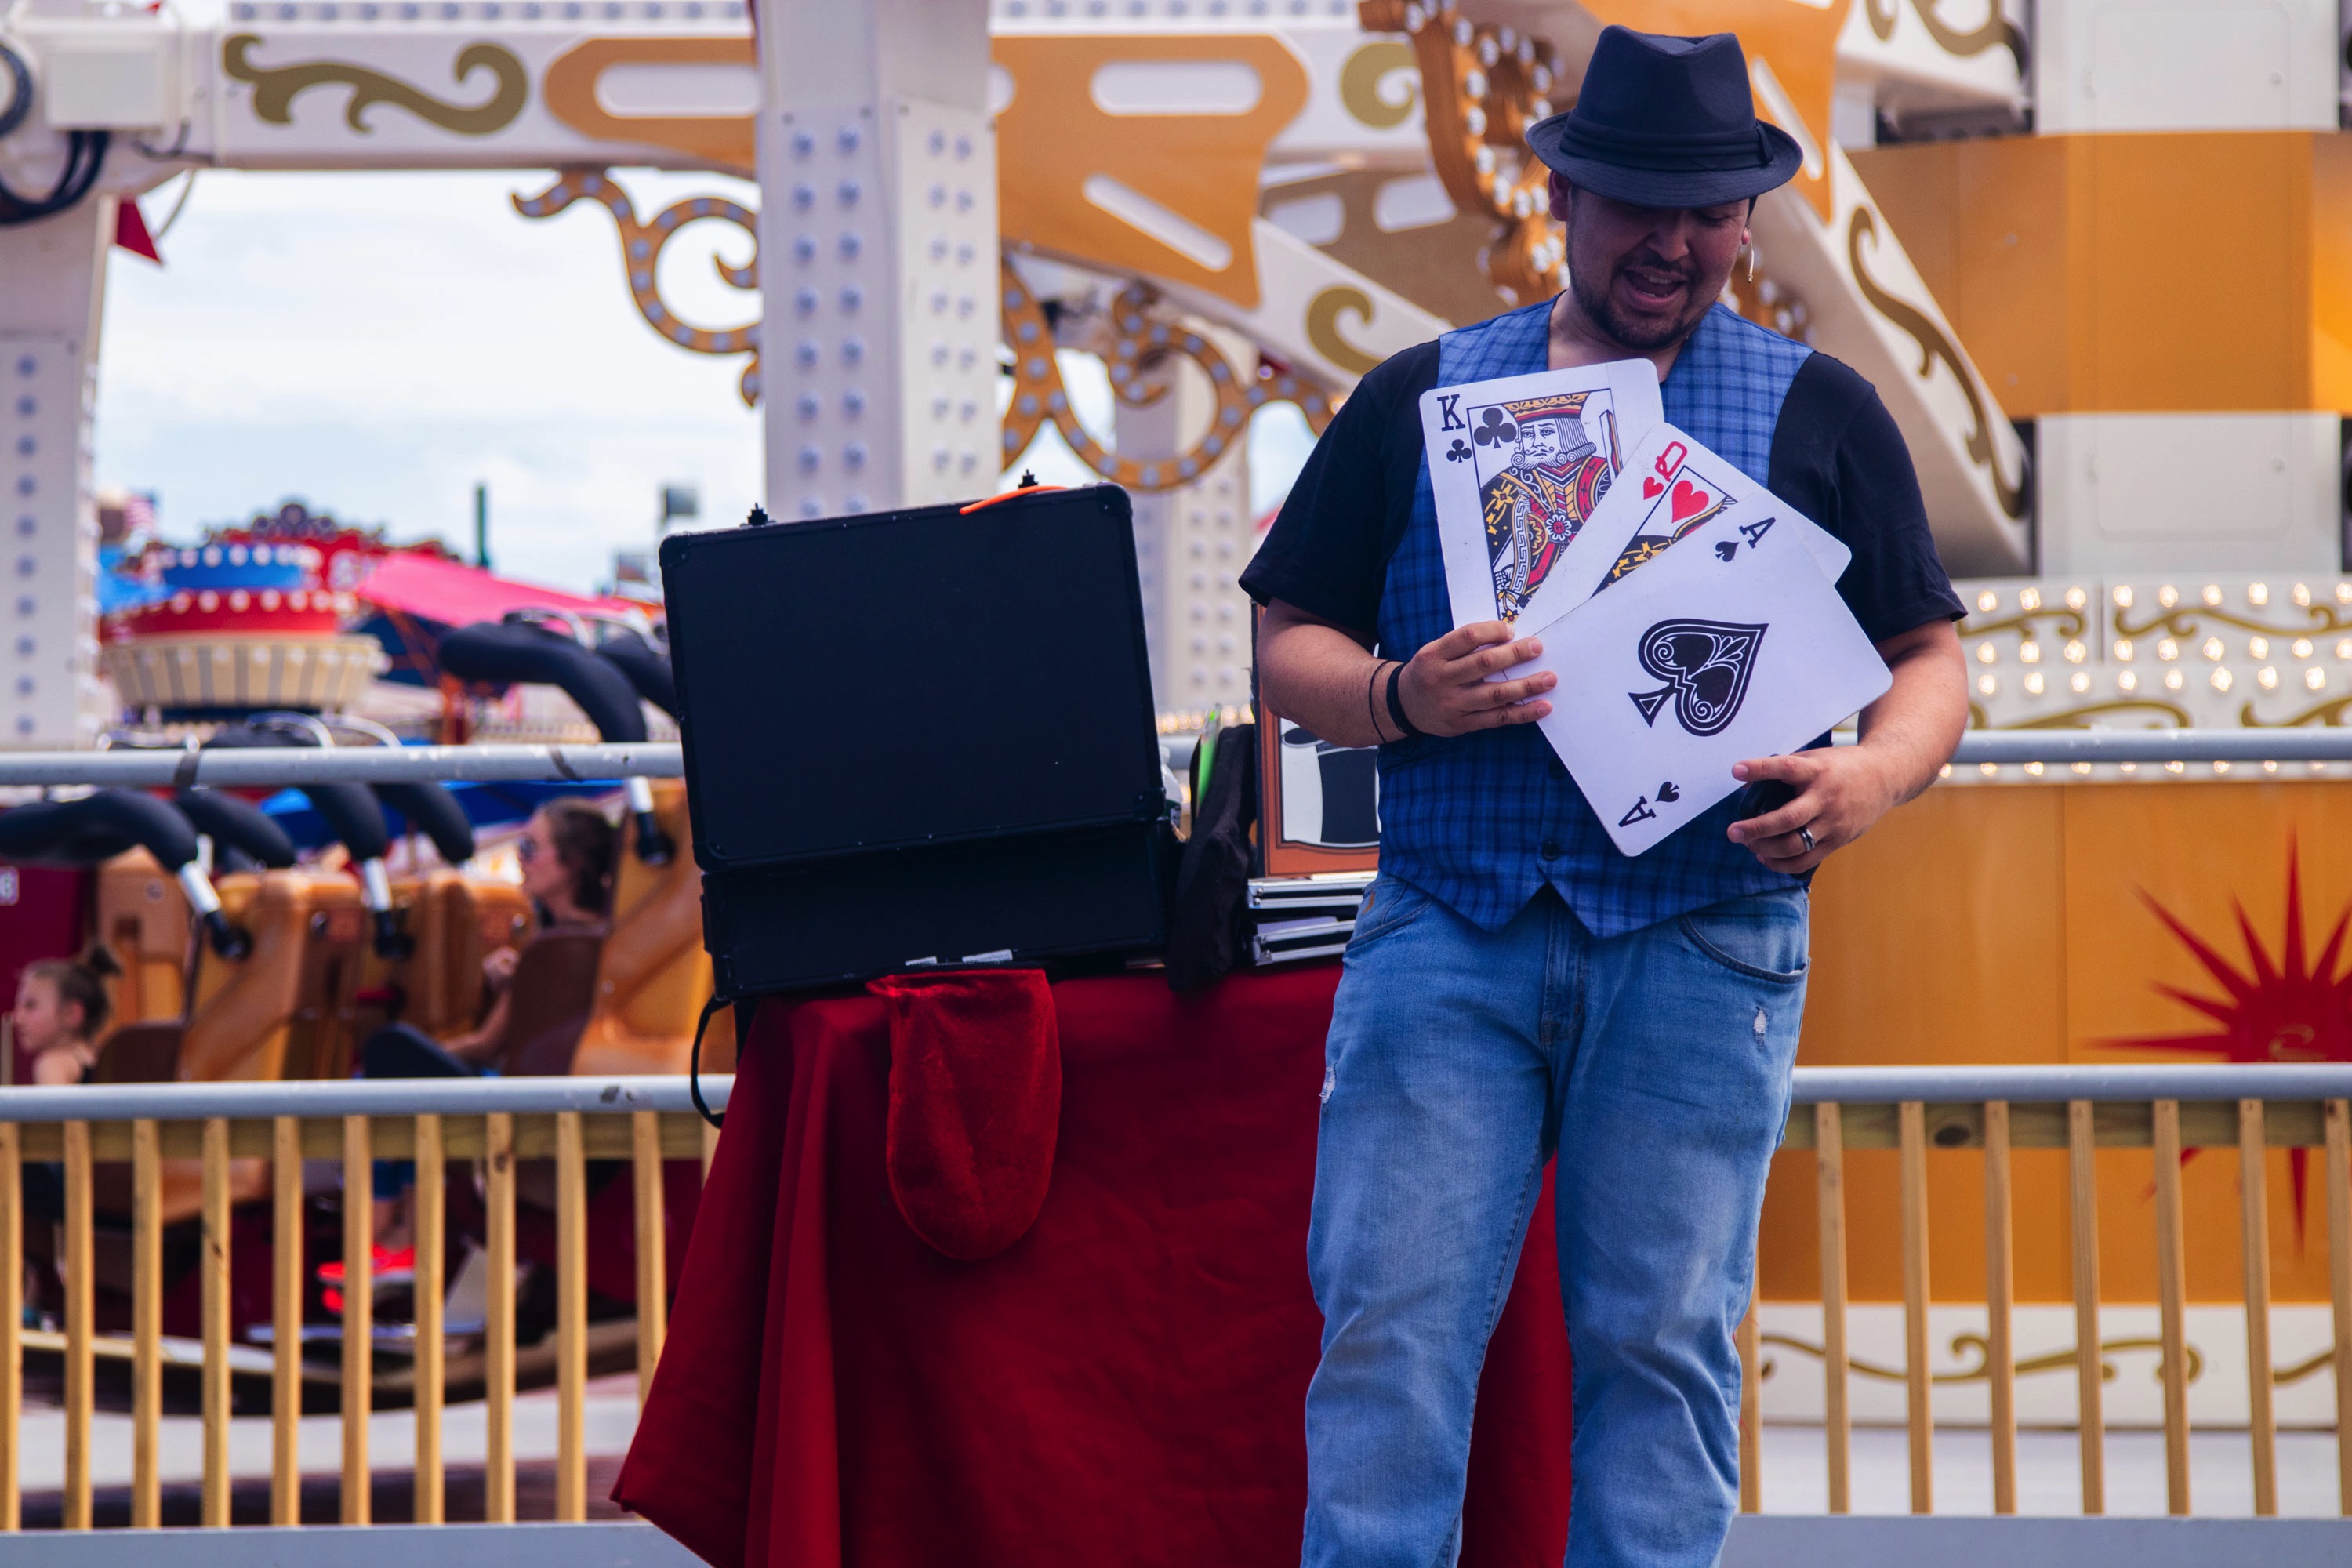 Luna Park Magician Omar Olusion at a public holiday event in NYC 2019